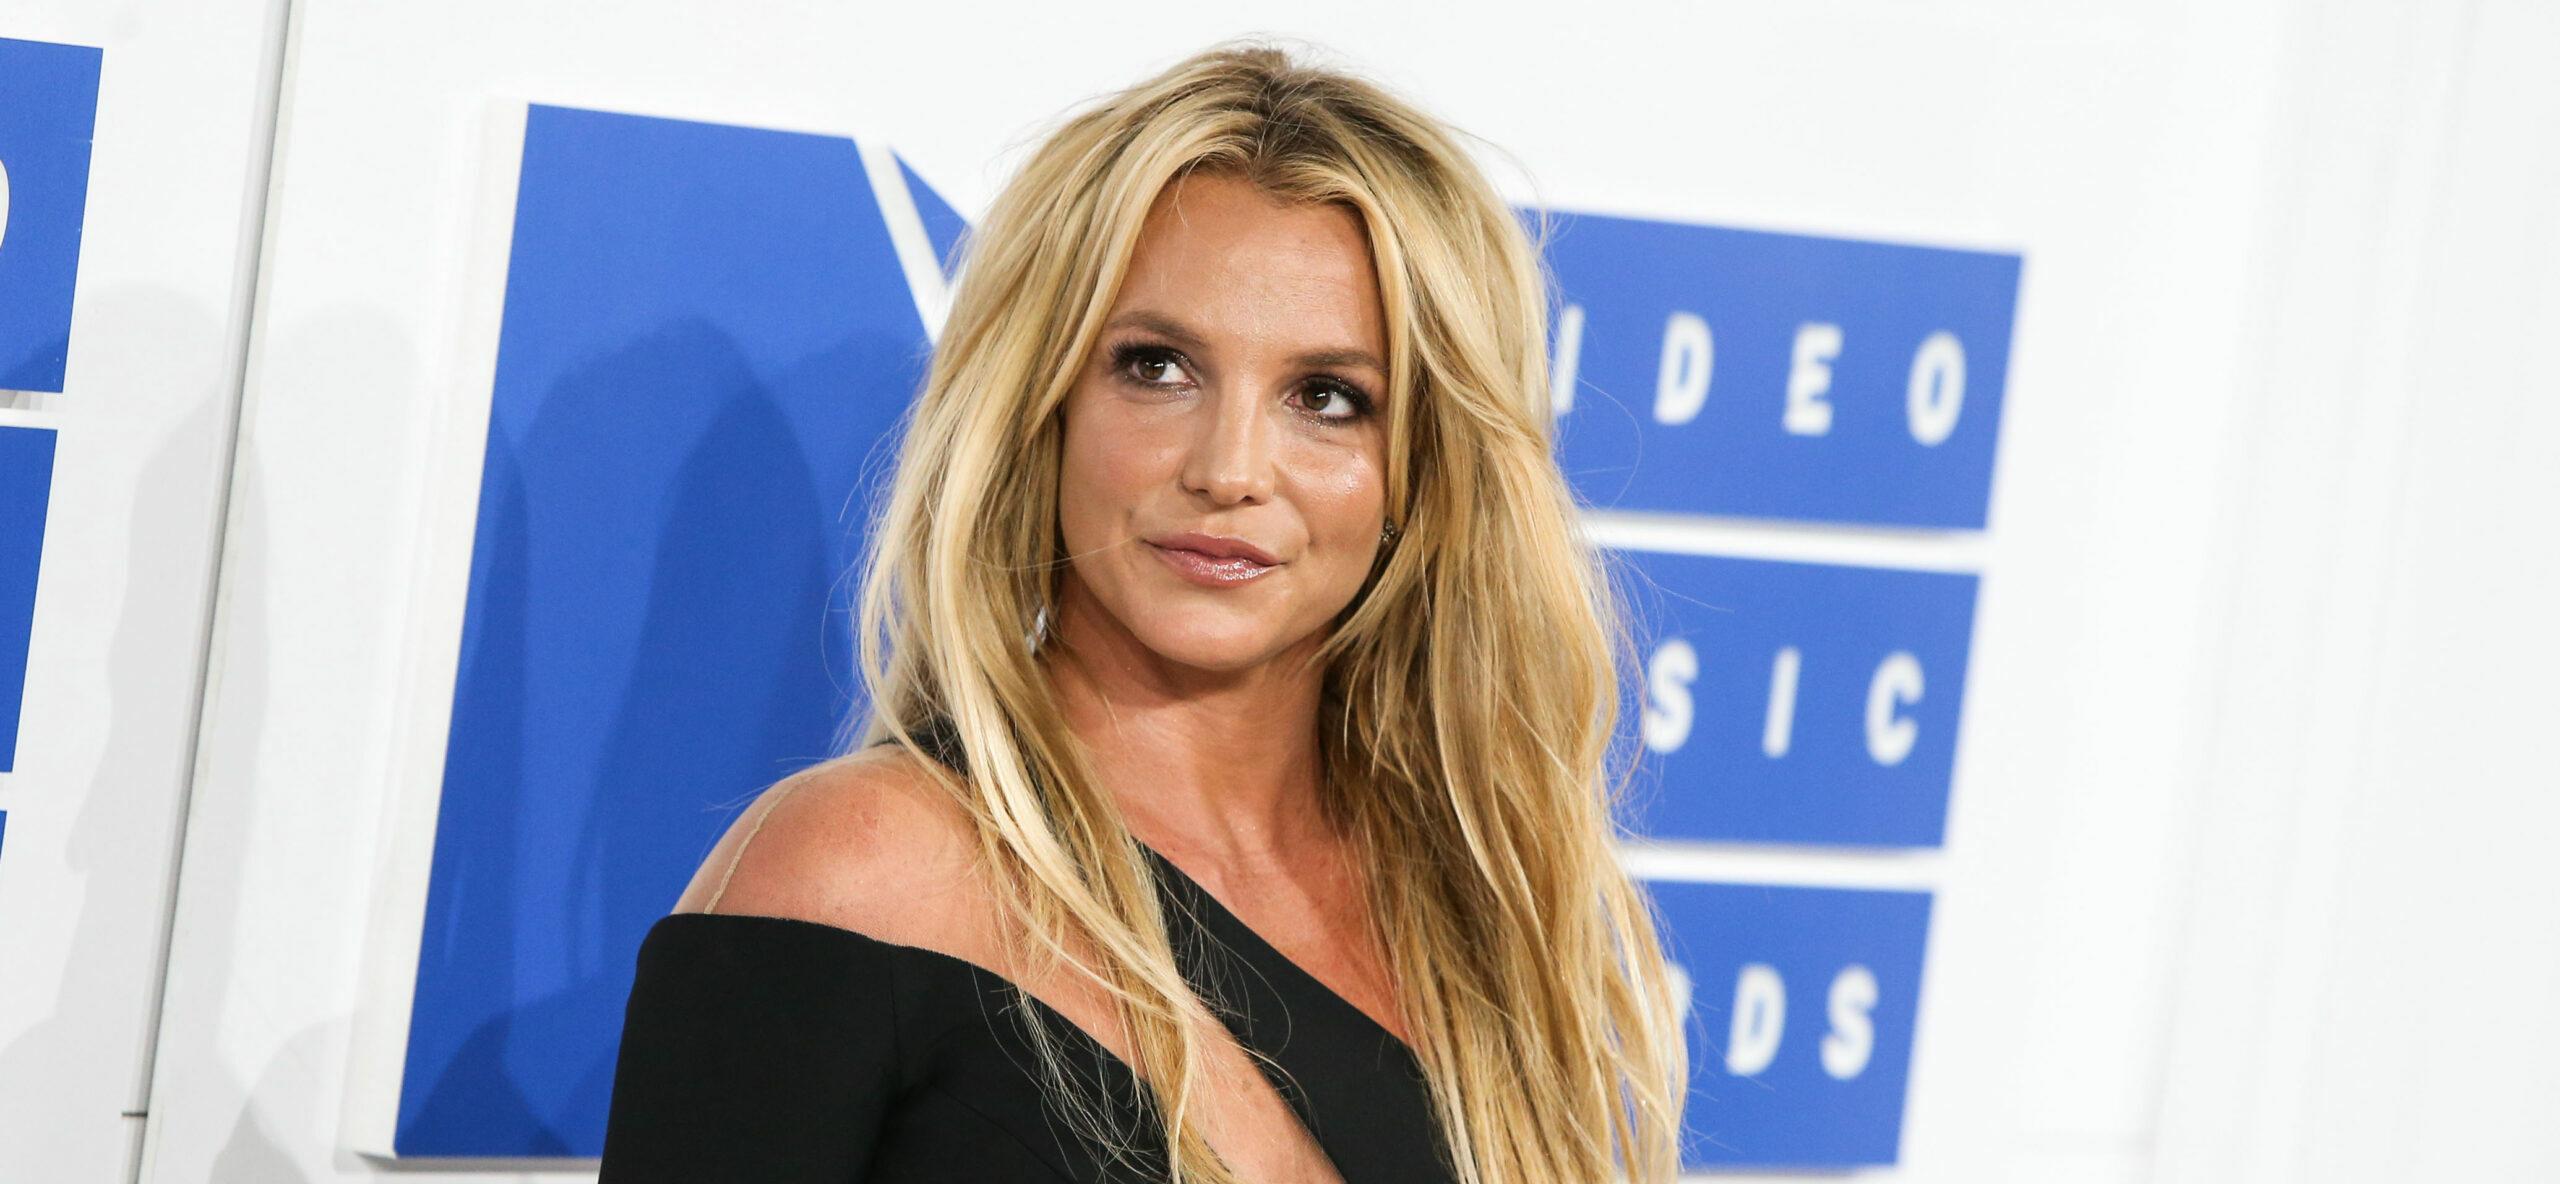 Britney Spears Claims ‘Half My Clothes Are Gone’ In Troubling Post